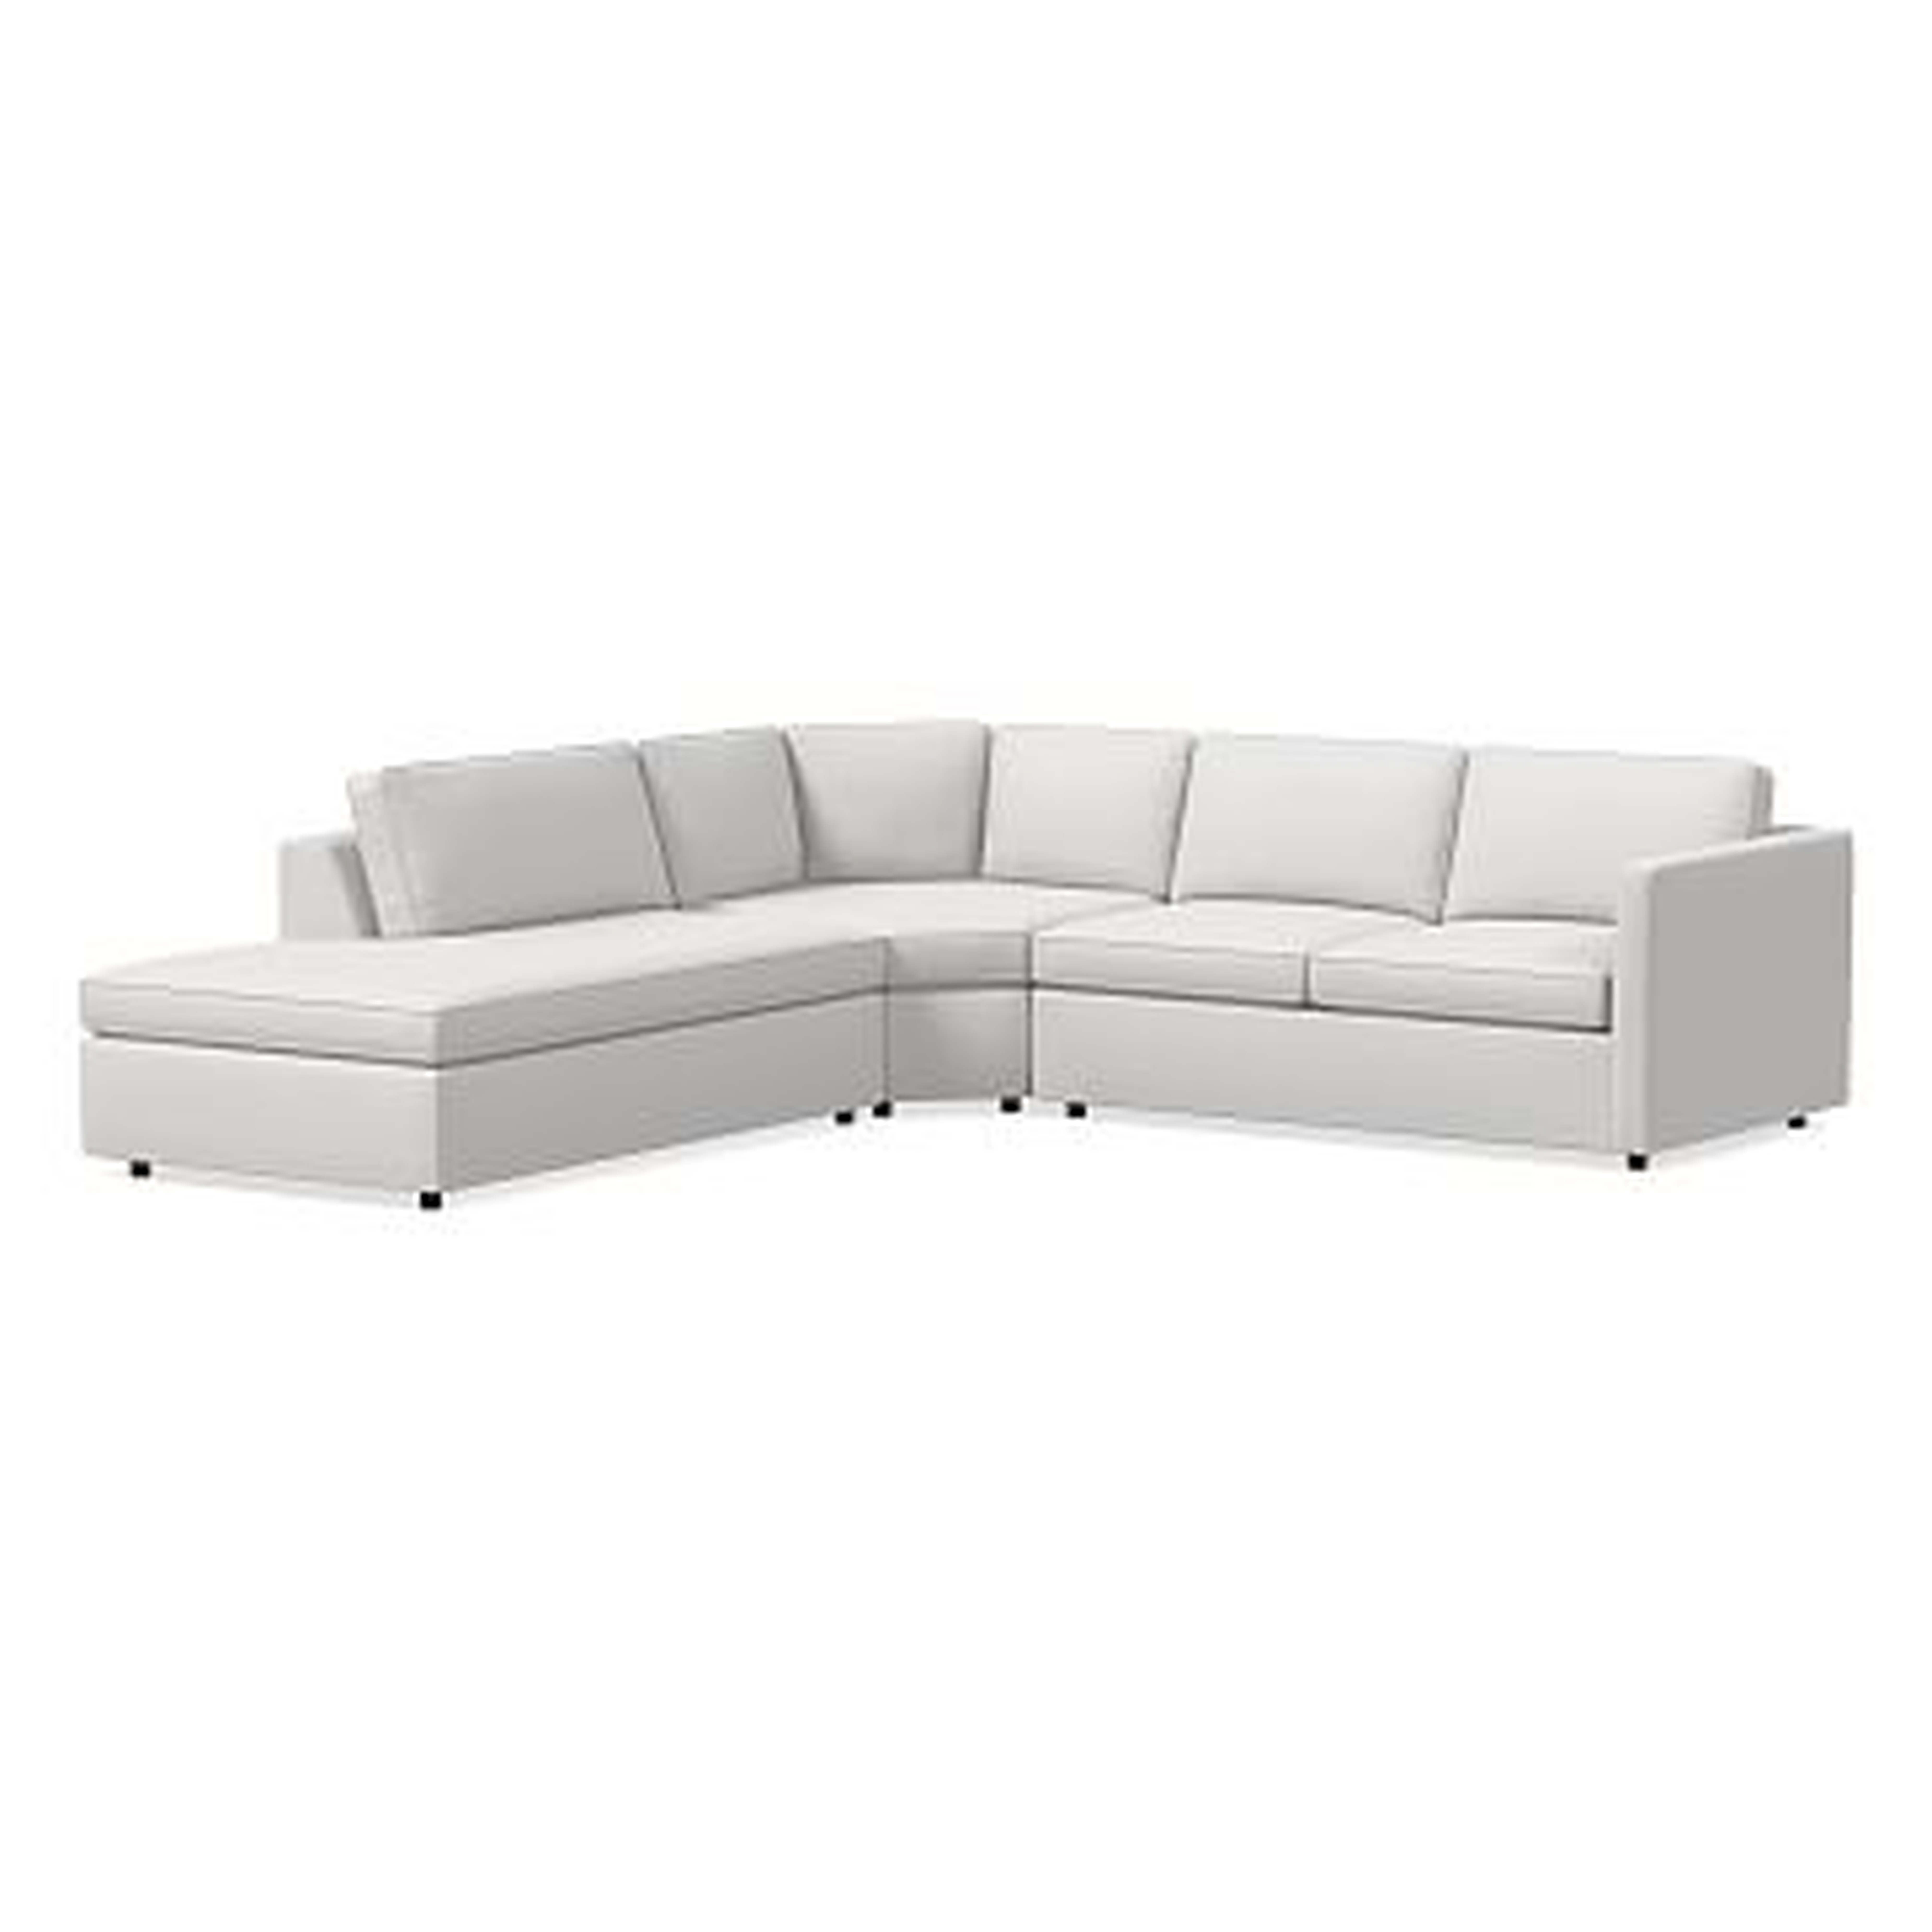 Harris Sectional Set 49: Right Arm 65" Sofa, Wedge, Left Arm Bumper Chaise, Poly, Performance Washed Canvas, White, Concealed Supports - West Elm